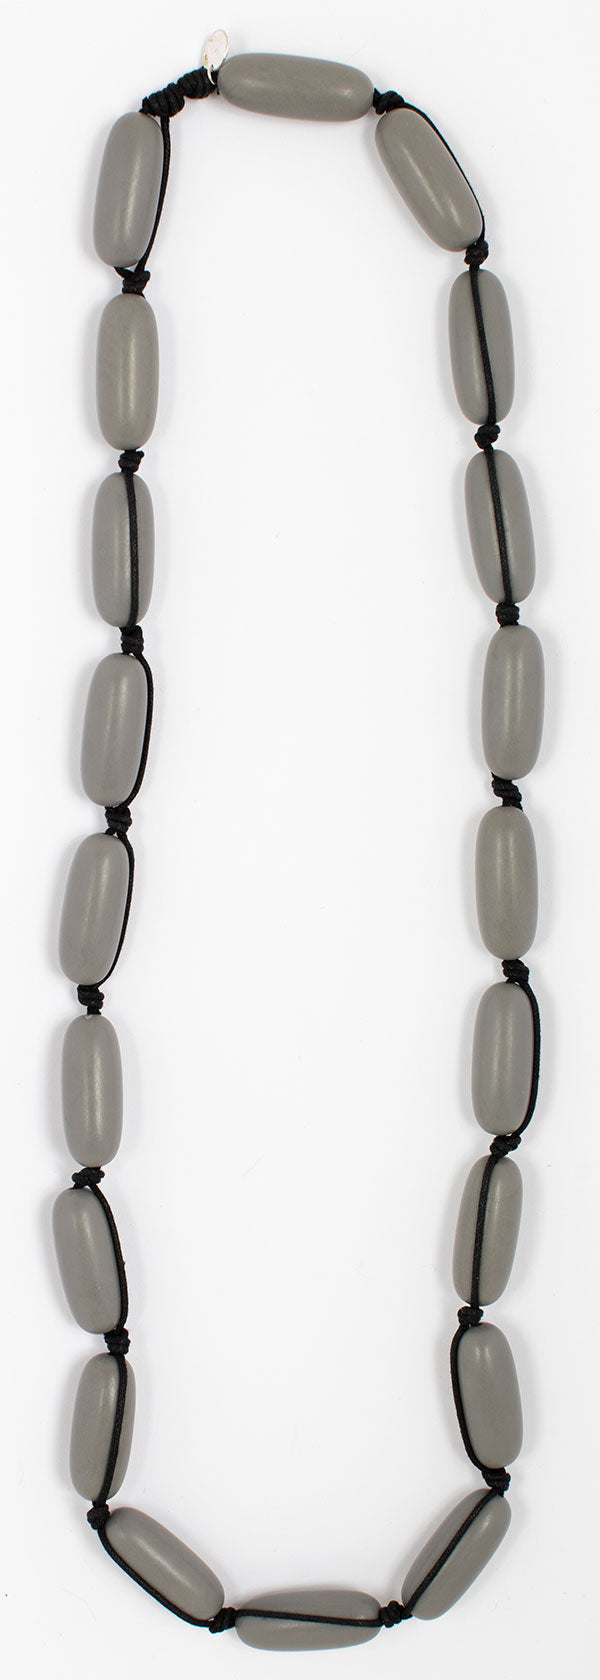 Evie Marques Original necklace Stone on black cord